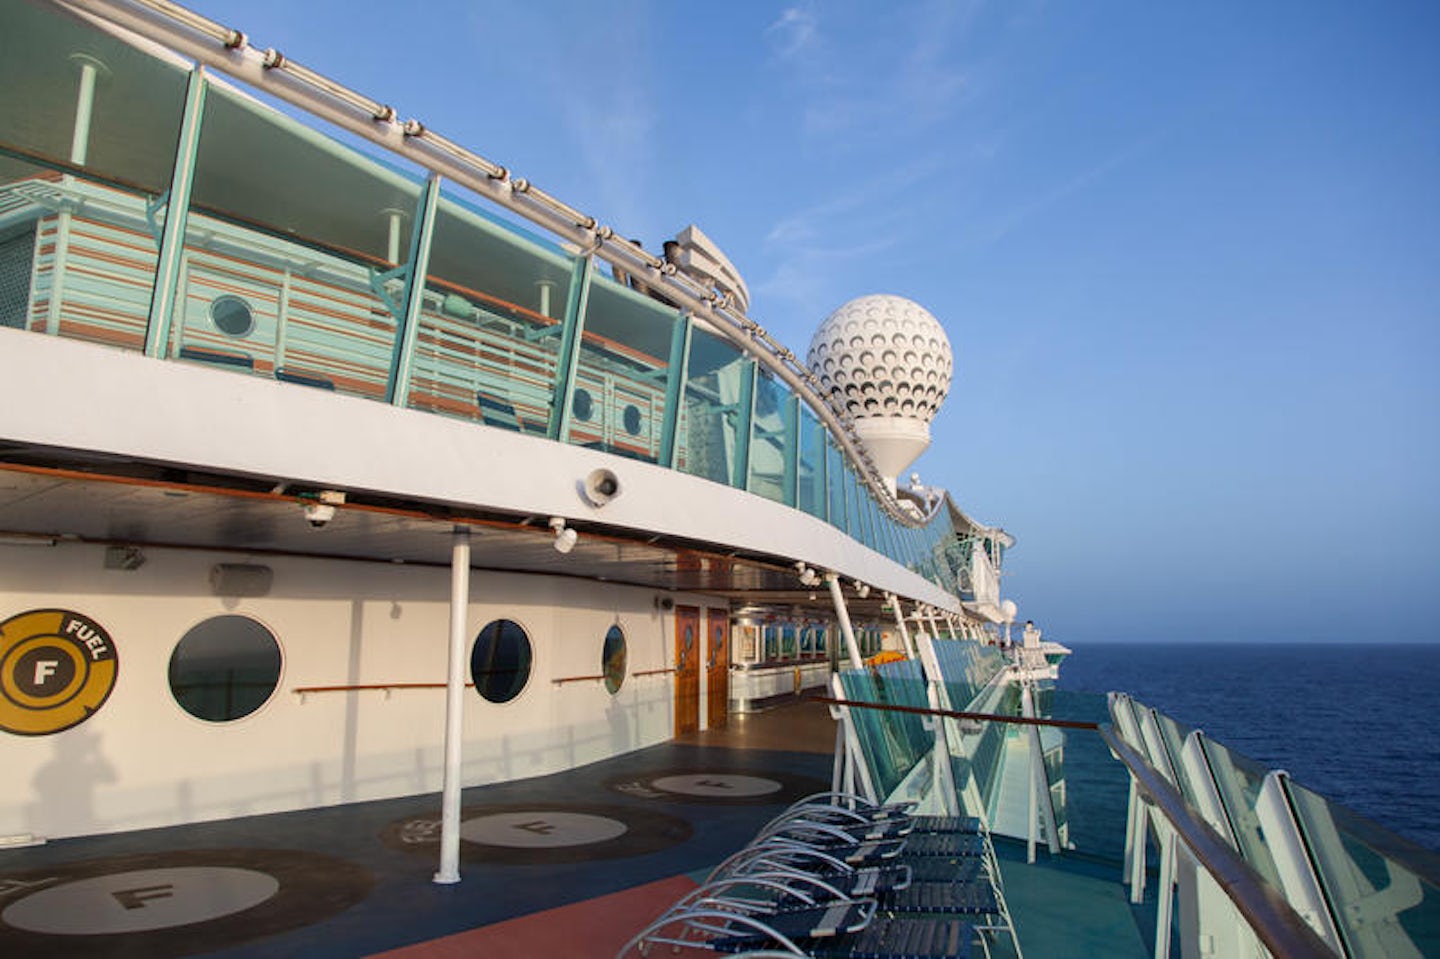 Decks on Independence of the Seas